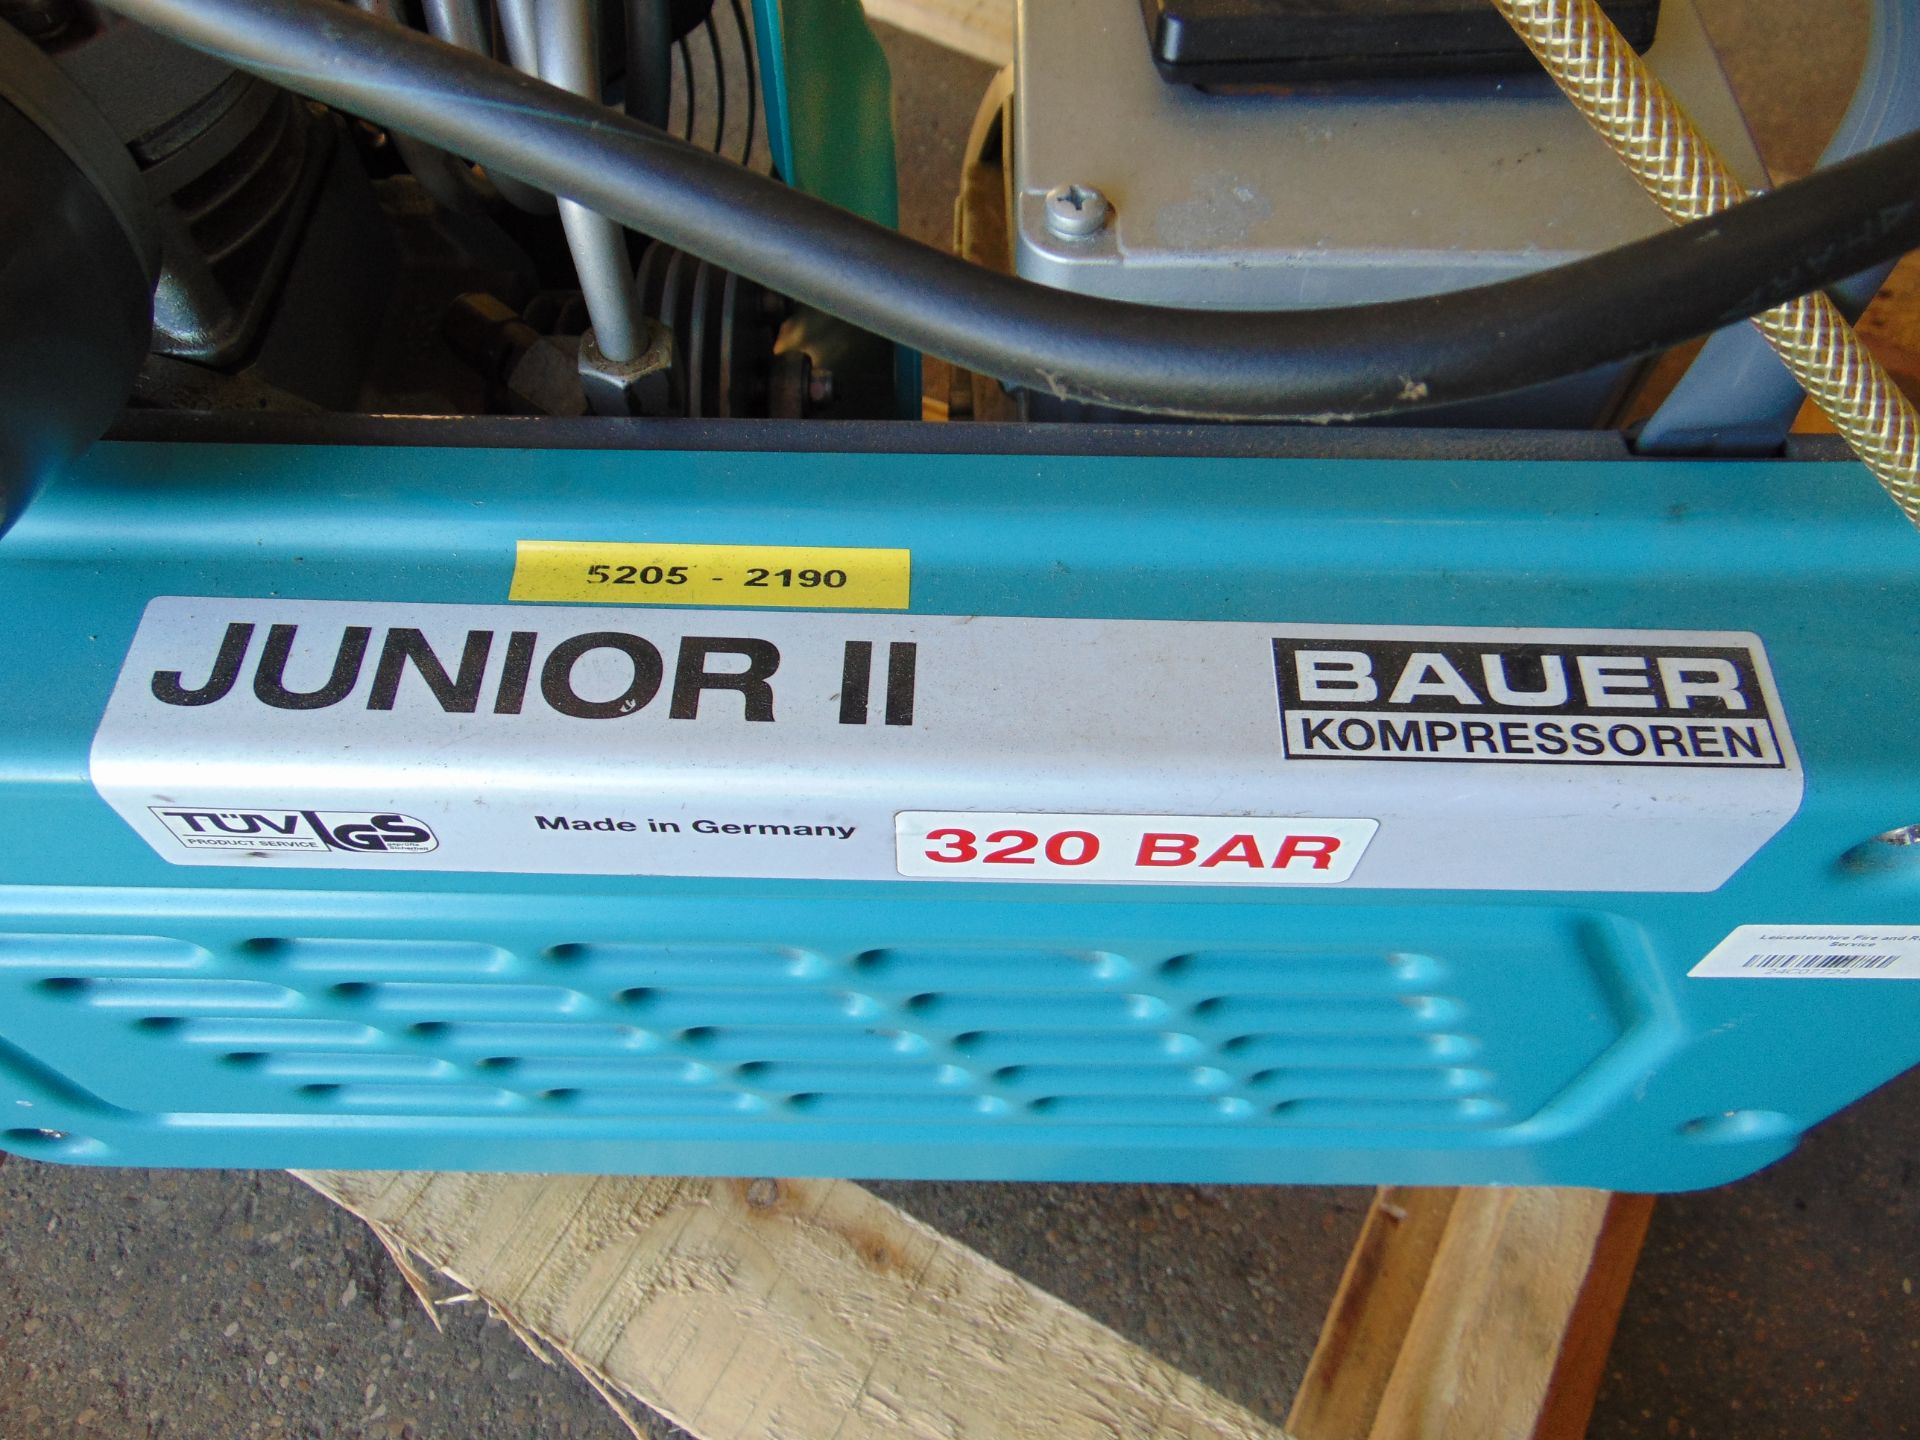 Bauer Junior II Portable Single Phase Electric Air Compressor - Image 8 of 11